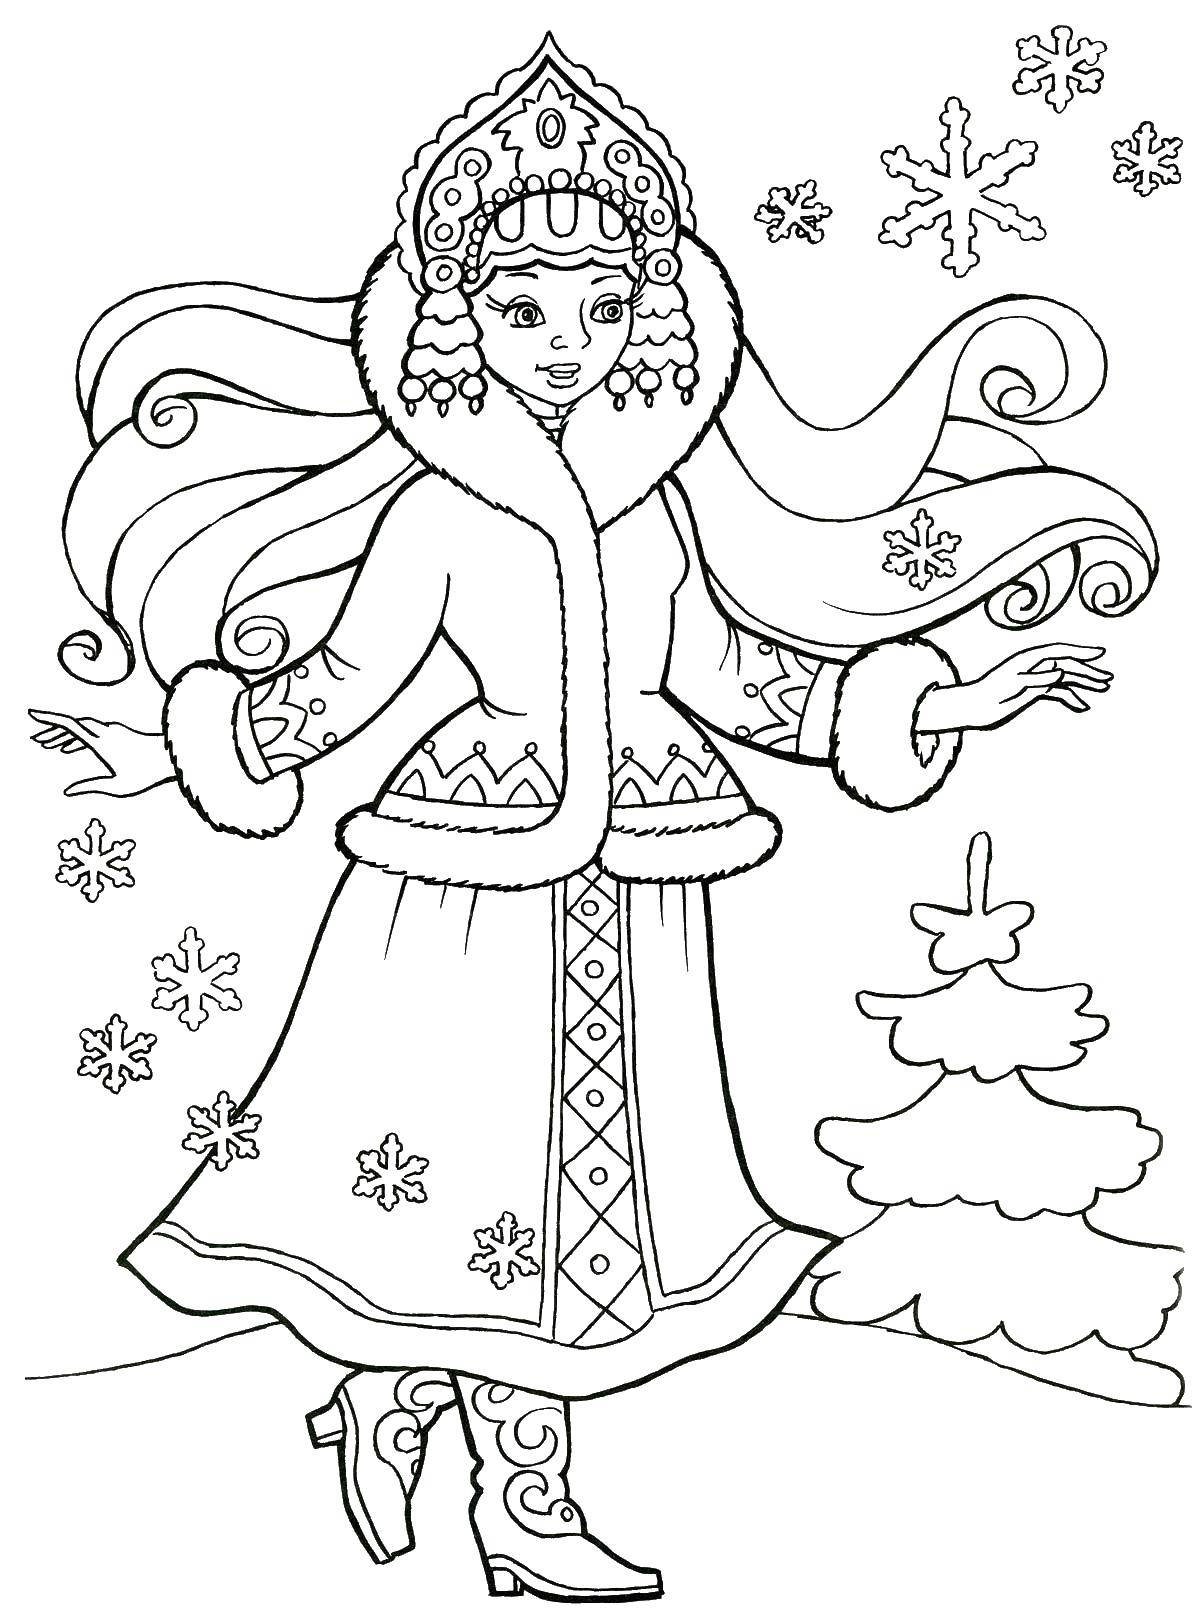 Coloring Snowflakes and snow maiden. Category the tale of Snegurochka. Tags:  snow maiden, snowflake tree.